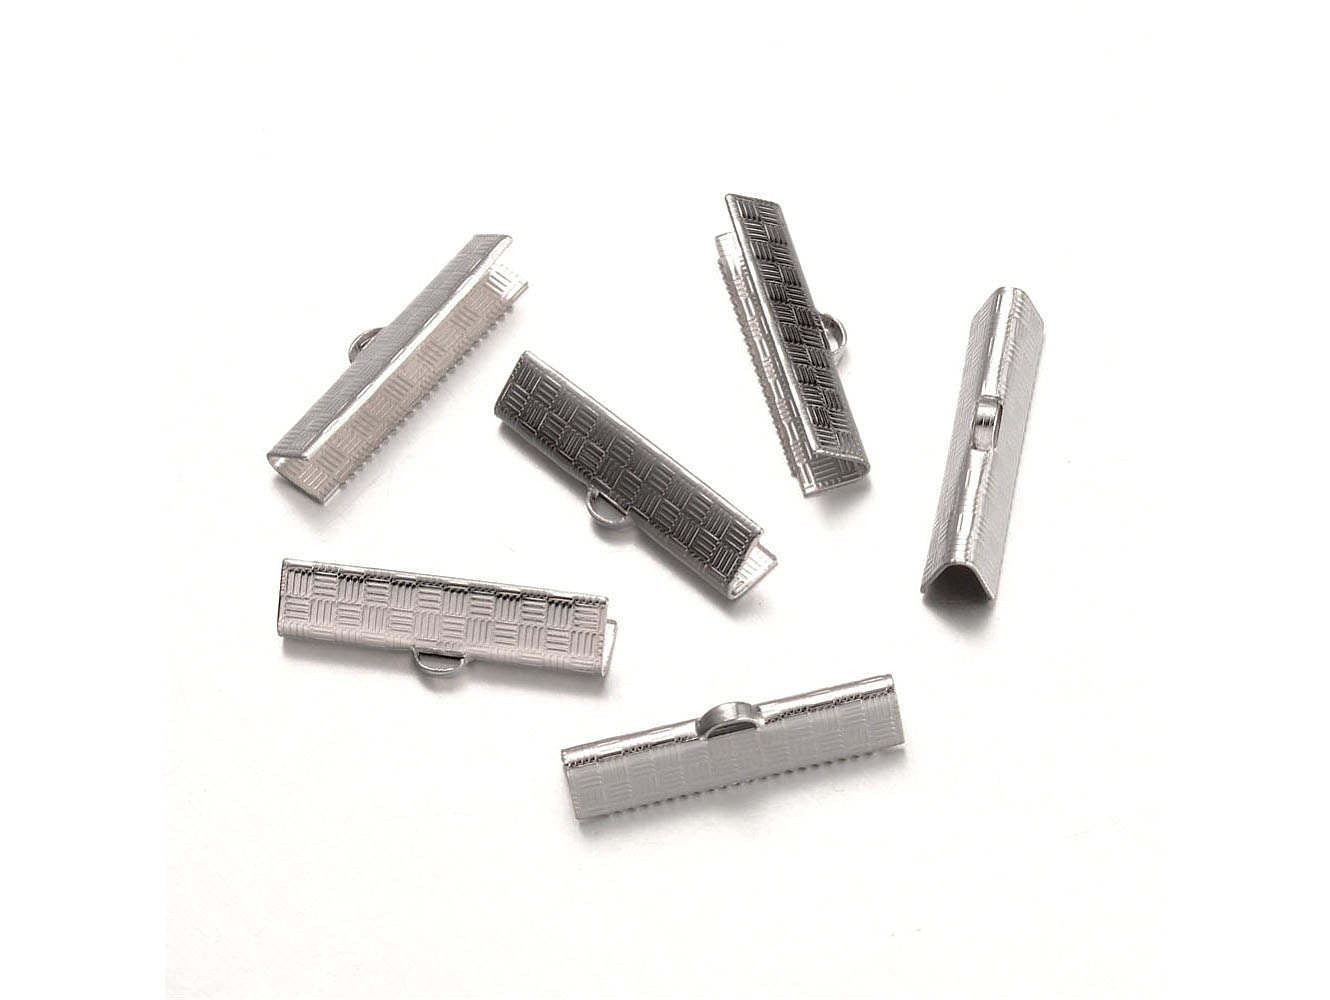 10 Stainless steel ribbon ends 13 or 25mm - 0.5 or 1 inch silver ribbon end crimps